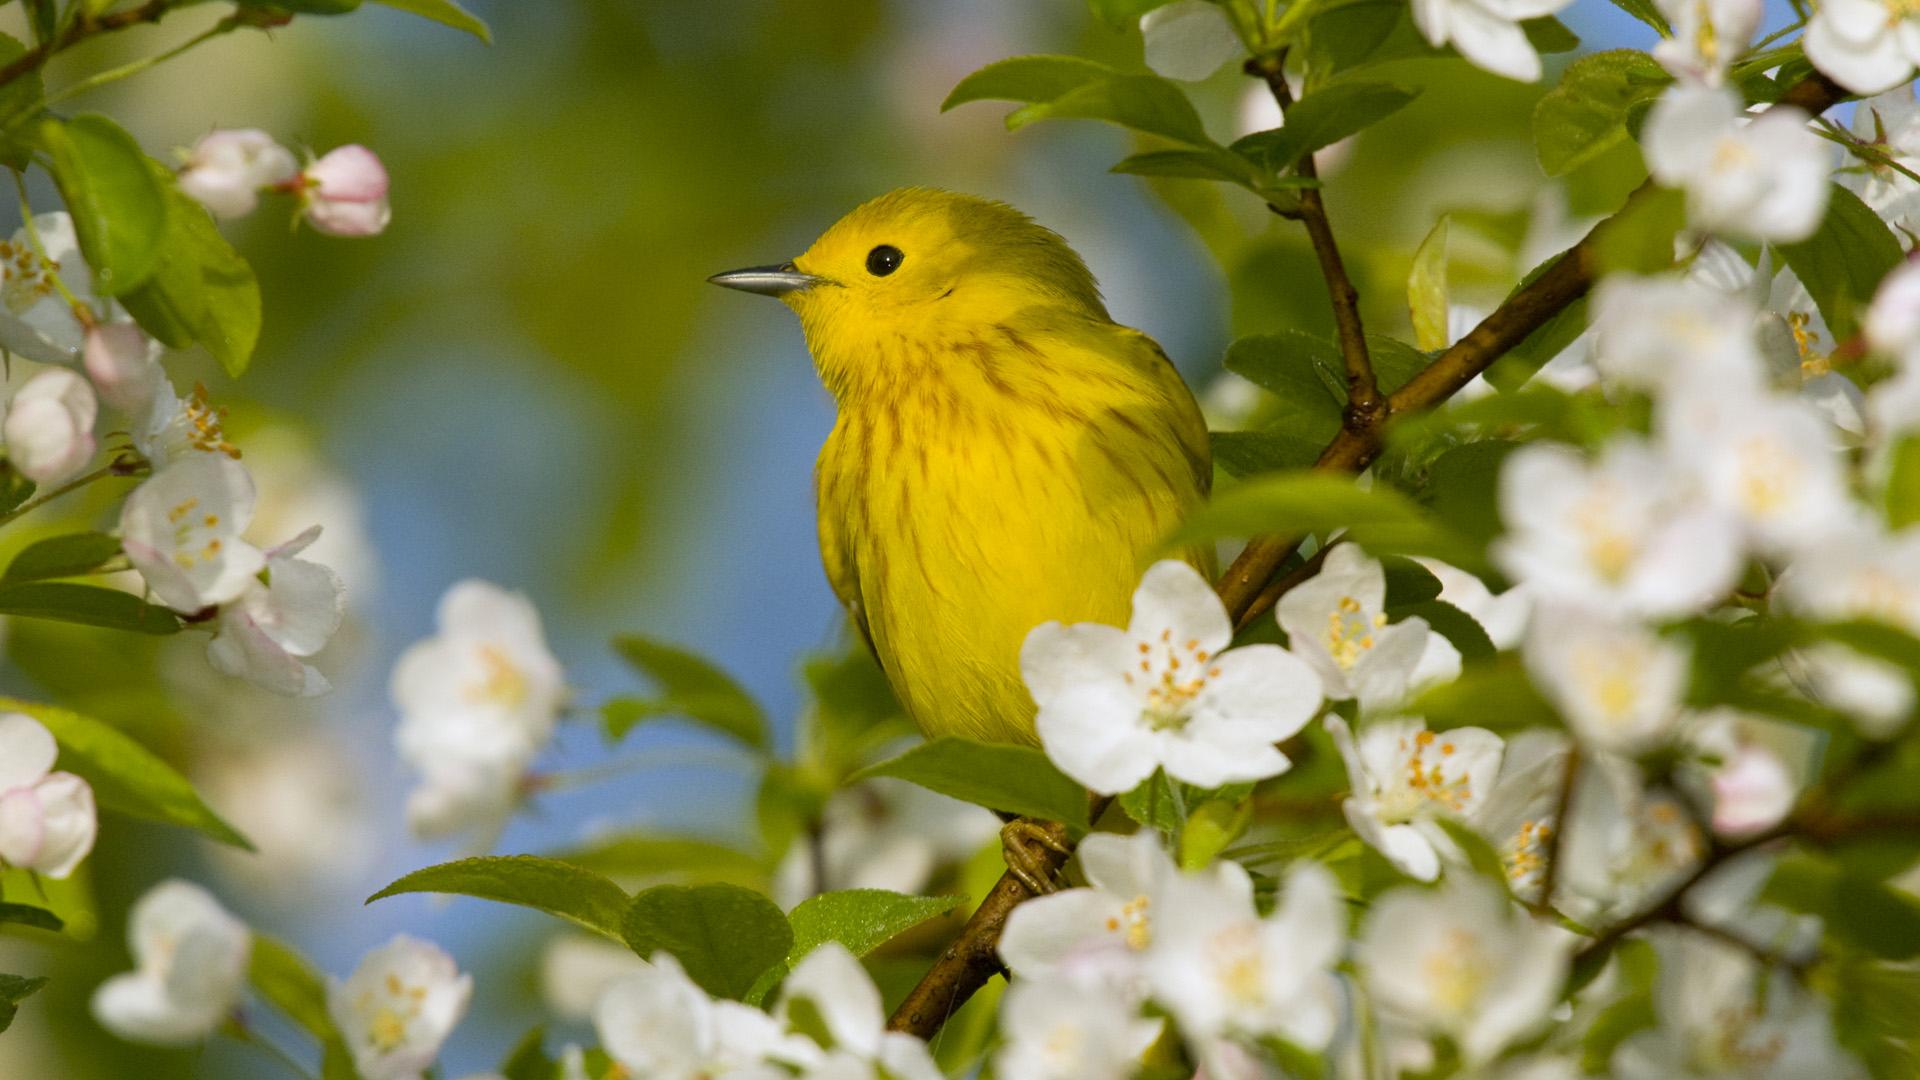 Birds and Blossoms Wallpaper 1920x1080